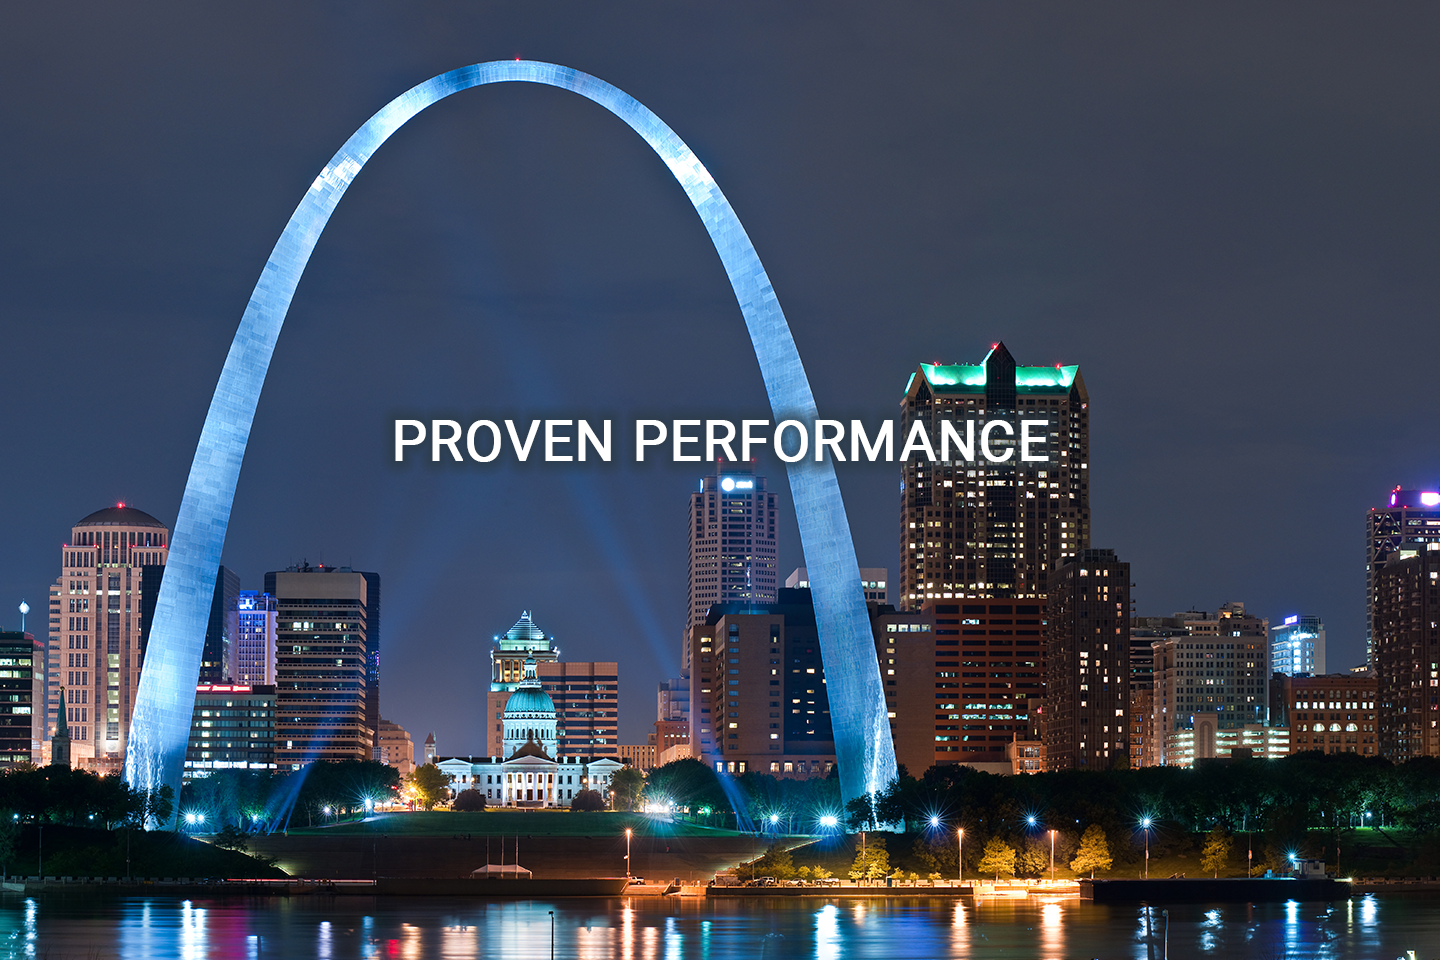 St Louis Based Capital Firm